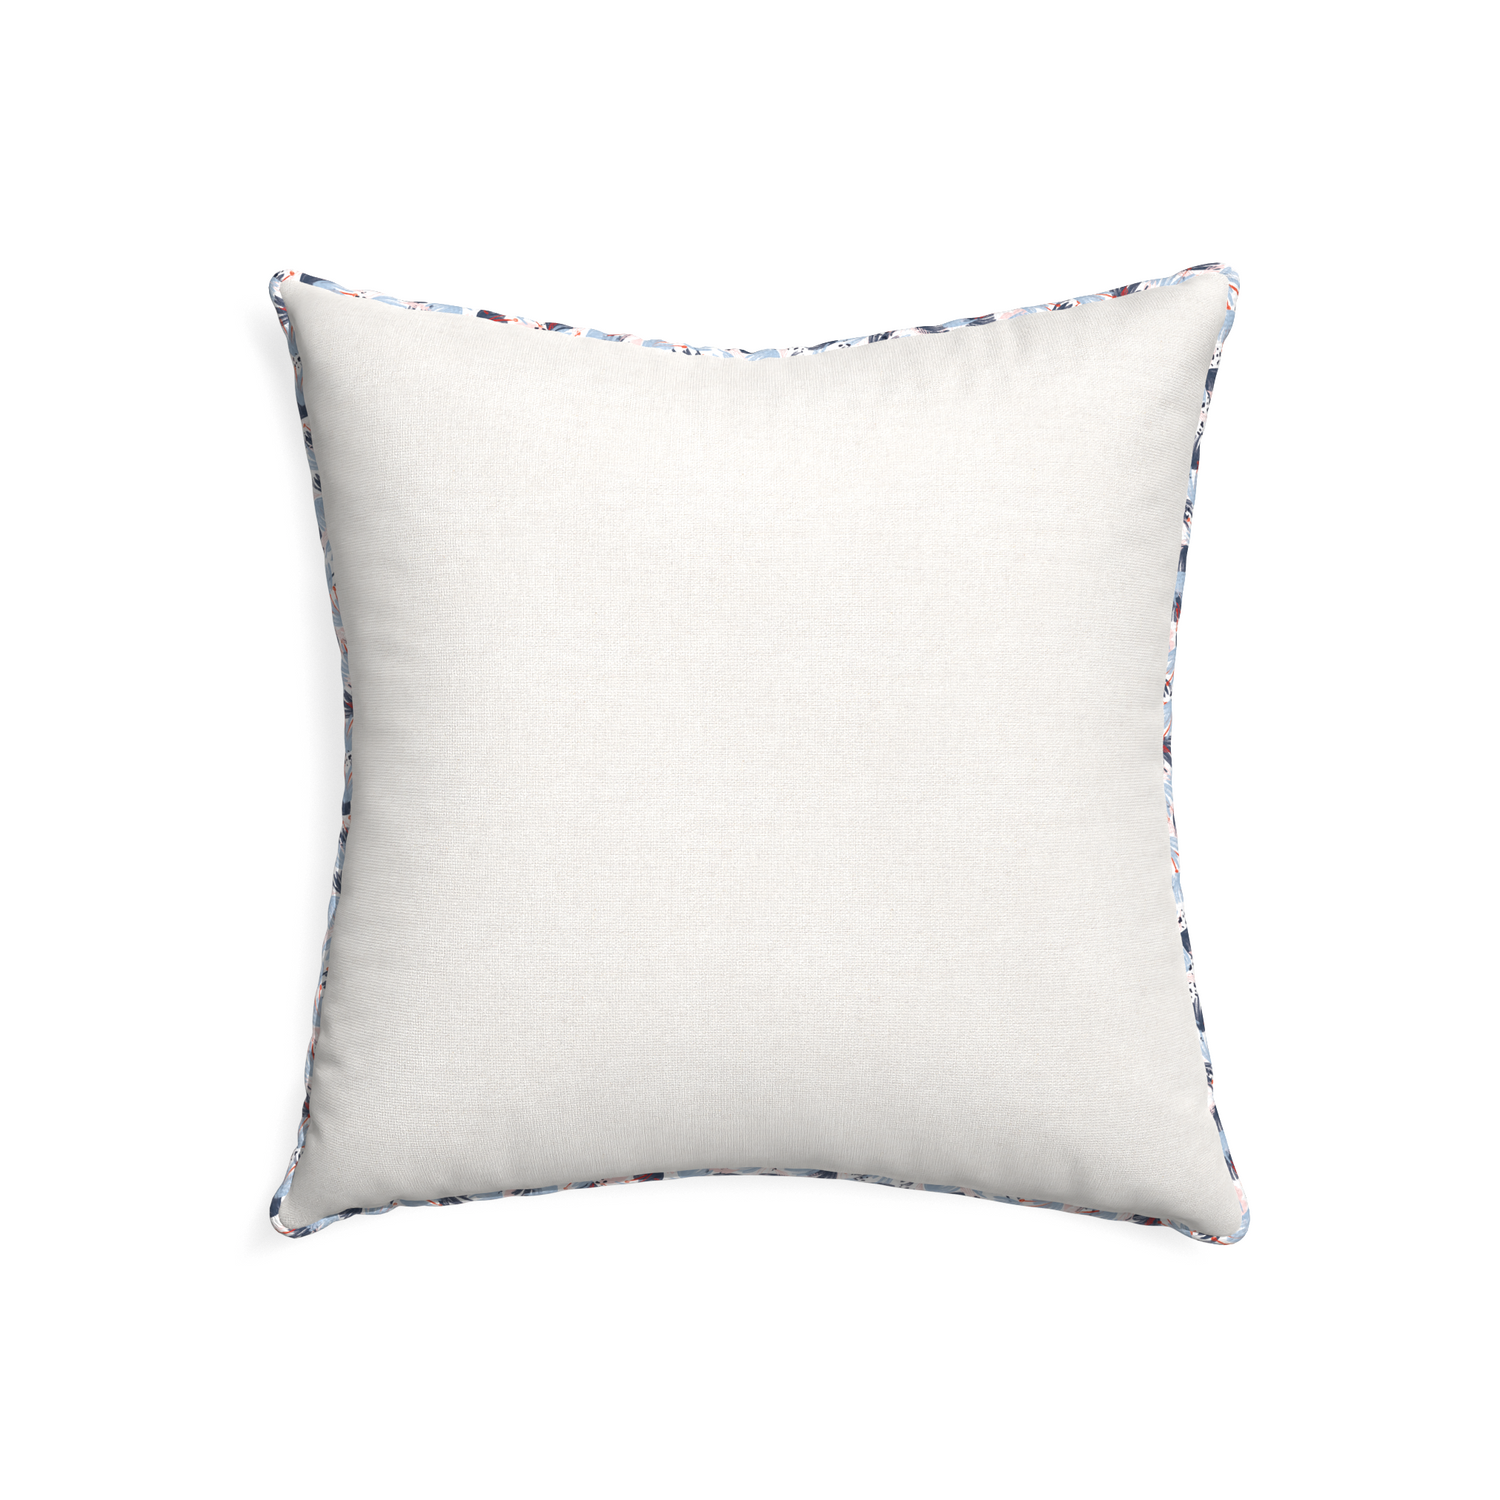 22-square flour custom pillow with e piping on white background